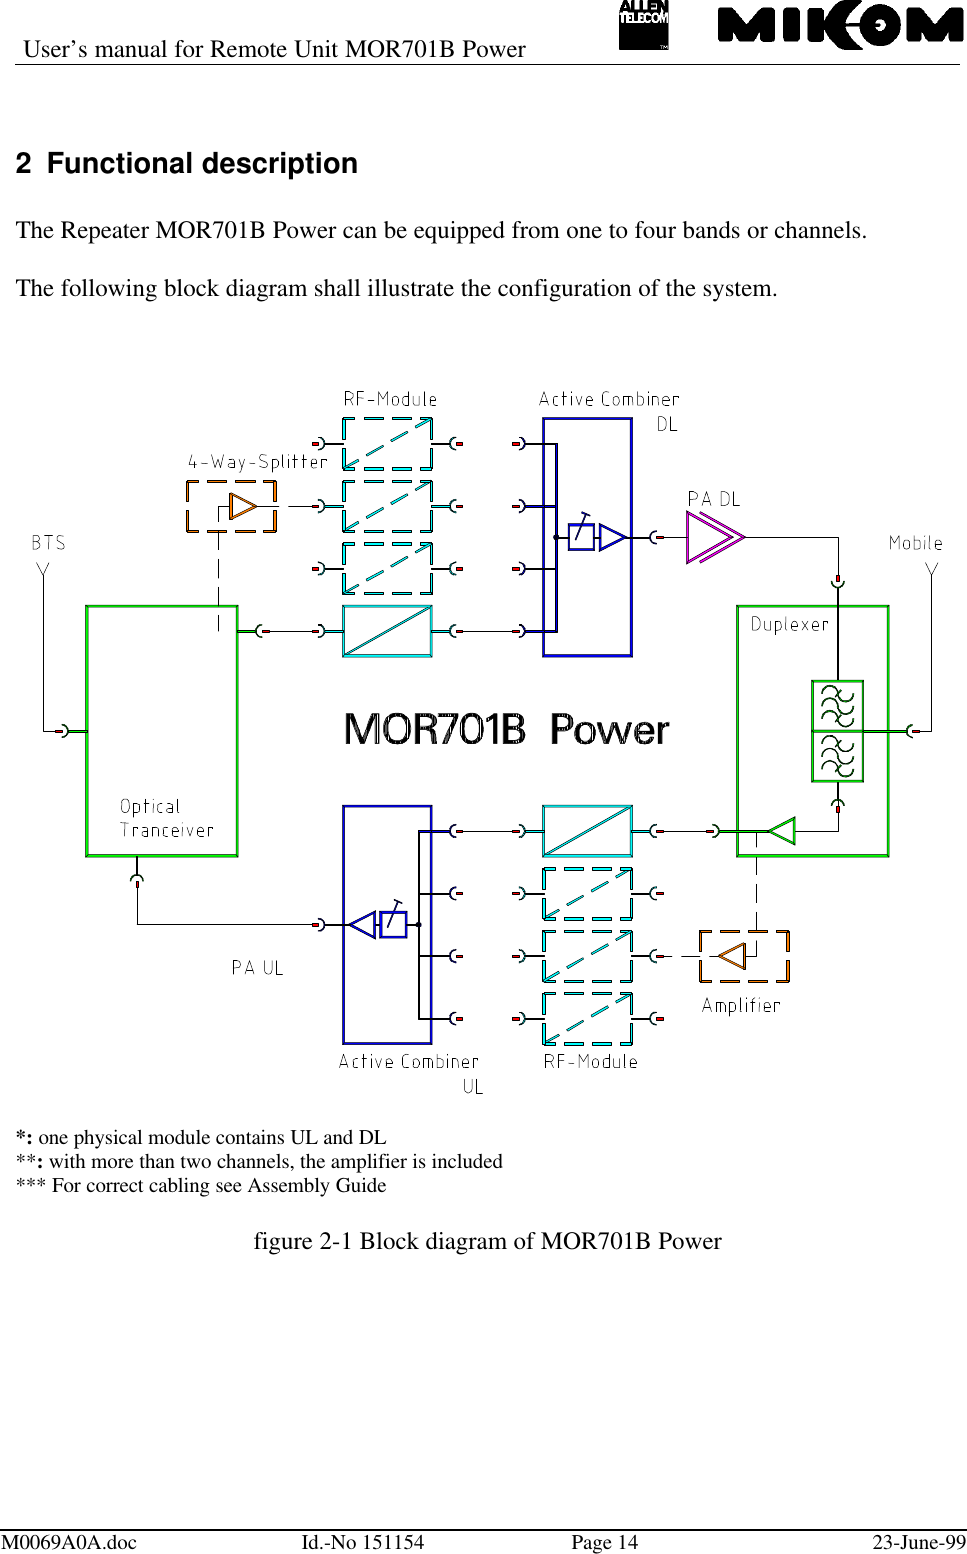 User’s manual for Remote Unit MOR701B PowerM0069A0A.doc Id.-No 151154 Page 14 23-June-992 Functional descriptionThe Repeater MOR701B Power can be equipped from one to four bands or channels.The following block diagram shall illustrate the configuration of the system.*: one physical module contains UL and DL**: with more than two channels, the amplifier is included*** For correct cabling see Assembly Guidefigure 2-1 Block diagram of MOR701B Power